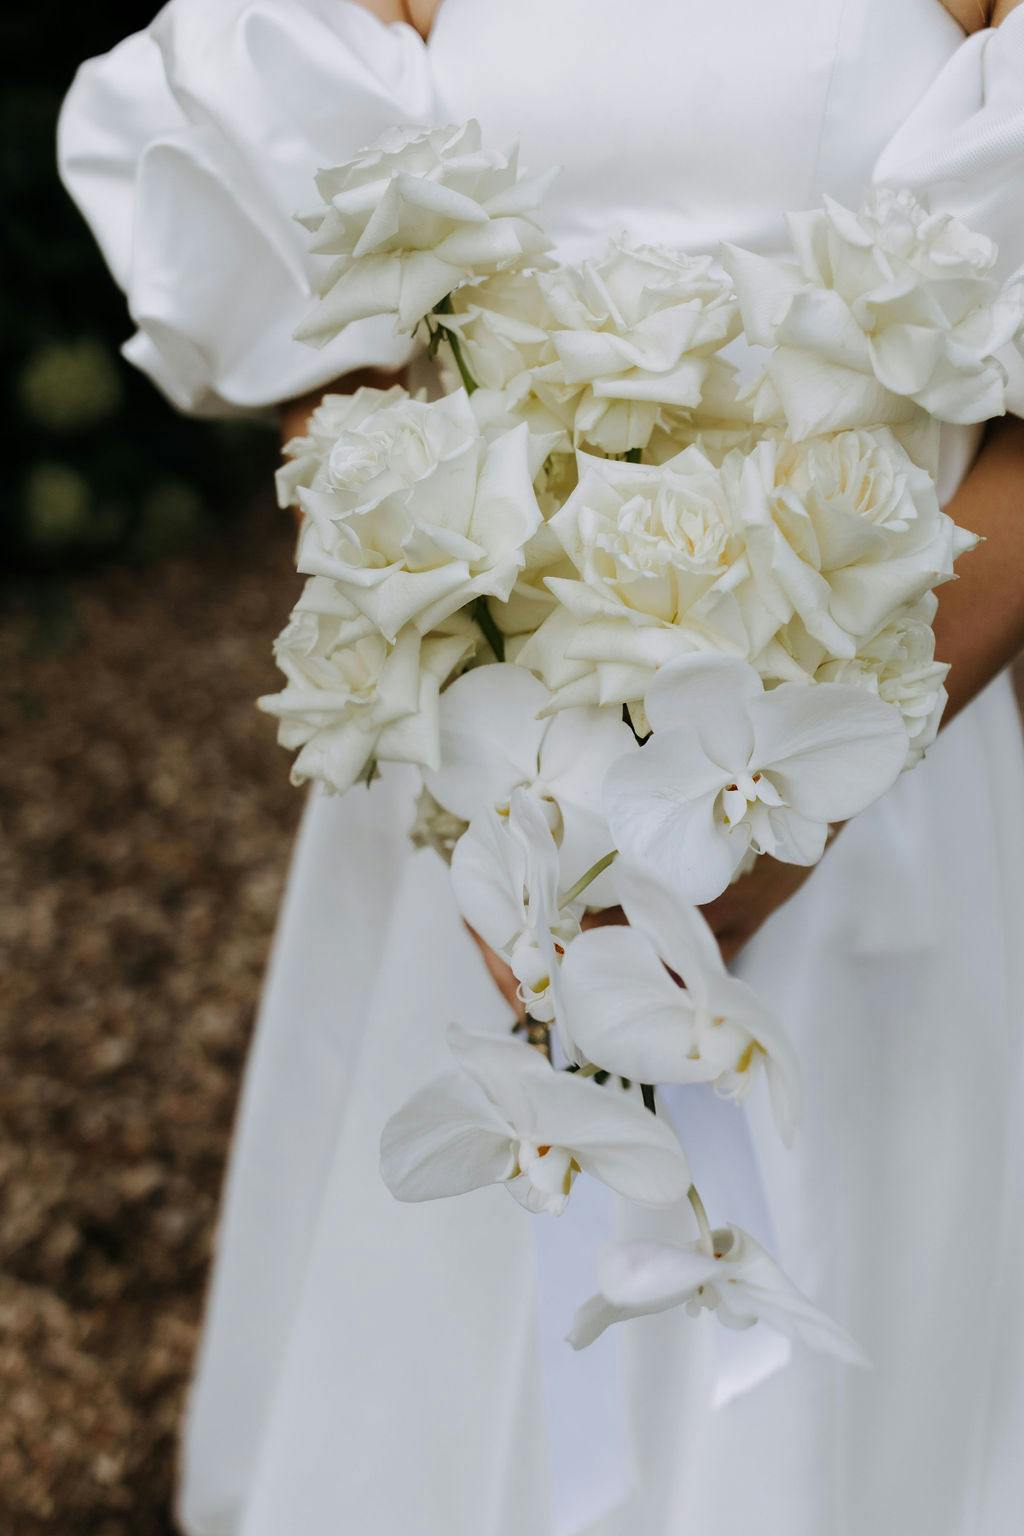 A bride in a white dress holds a bouquet of white roses and white orchids. The flowers are arranged elegantly, creating a classic and timeless look. The background is blurred, focusing attention on the bouquet.